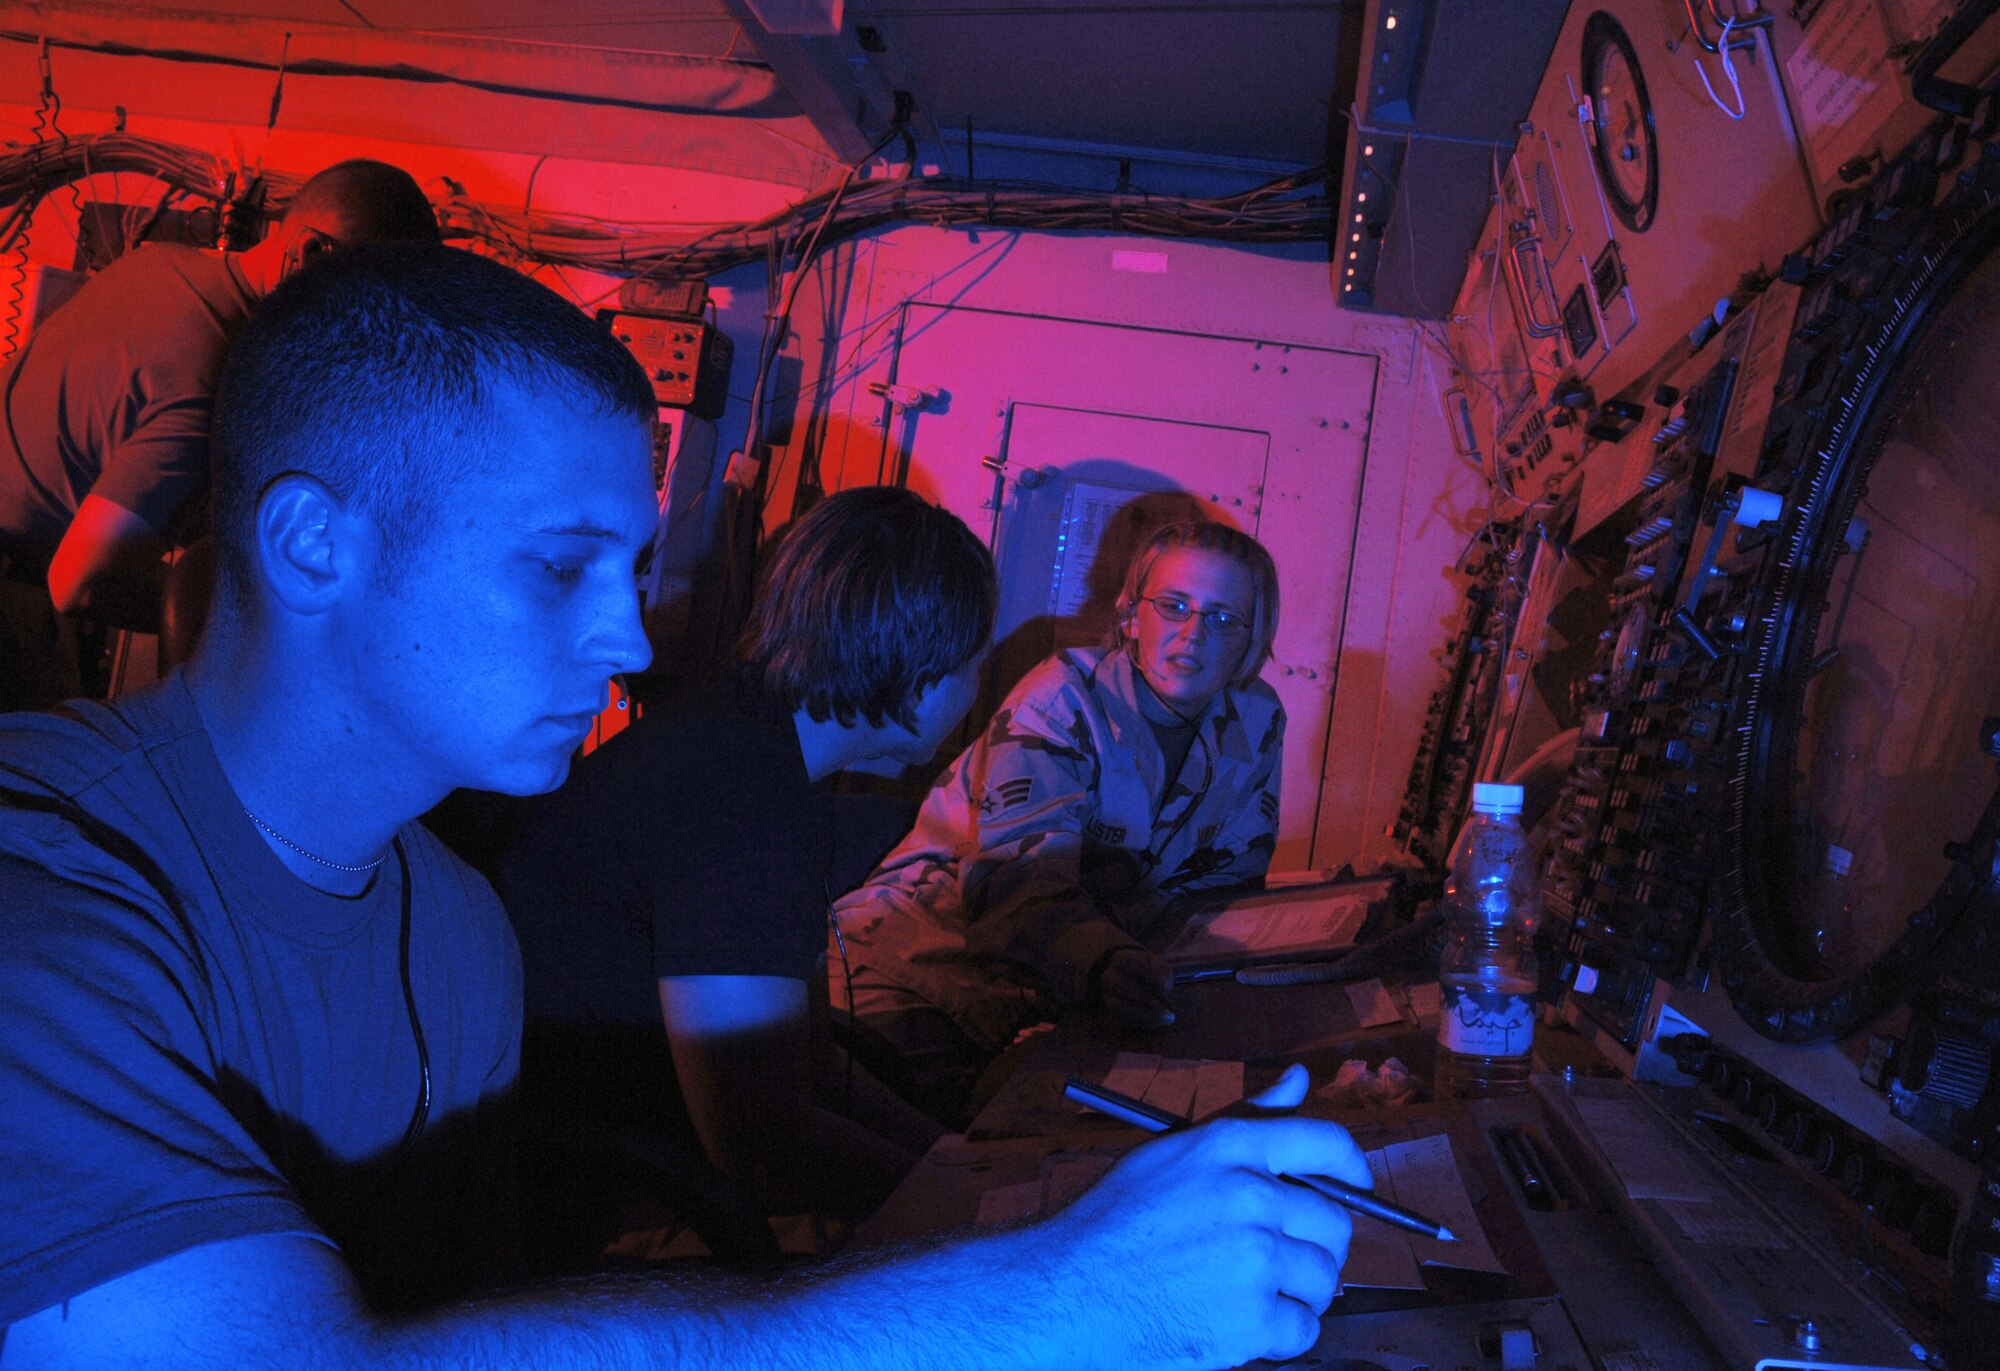 ALI BASE, Iraq -- (Left to right) Senior Airman Paul Oceanak monitors the radar scope while Senior Airman Megan Lister teaches Senior Airman Bobbie Tenney how to juggle both civil and combat air traffic. Putting fighters on target is a first for the crew of controllers who direct airplane traffic within 50,000 square miles surrounding Ali Base. The three Airmen are area control center controllers with the 407th Expeditionary Operations Support Squadron. (U.S. Air Force photo by Master Sgt. Maurice Hessel)